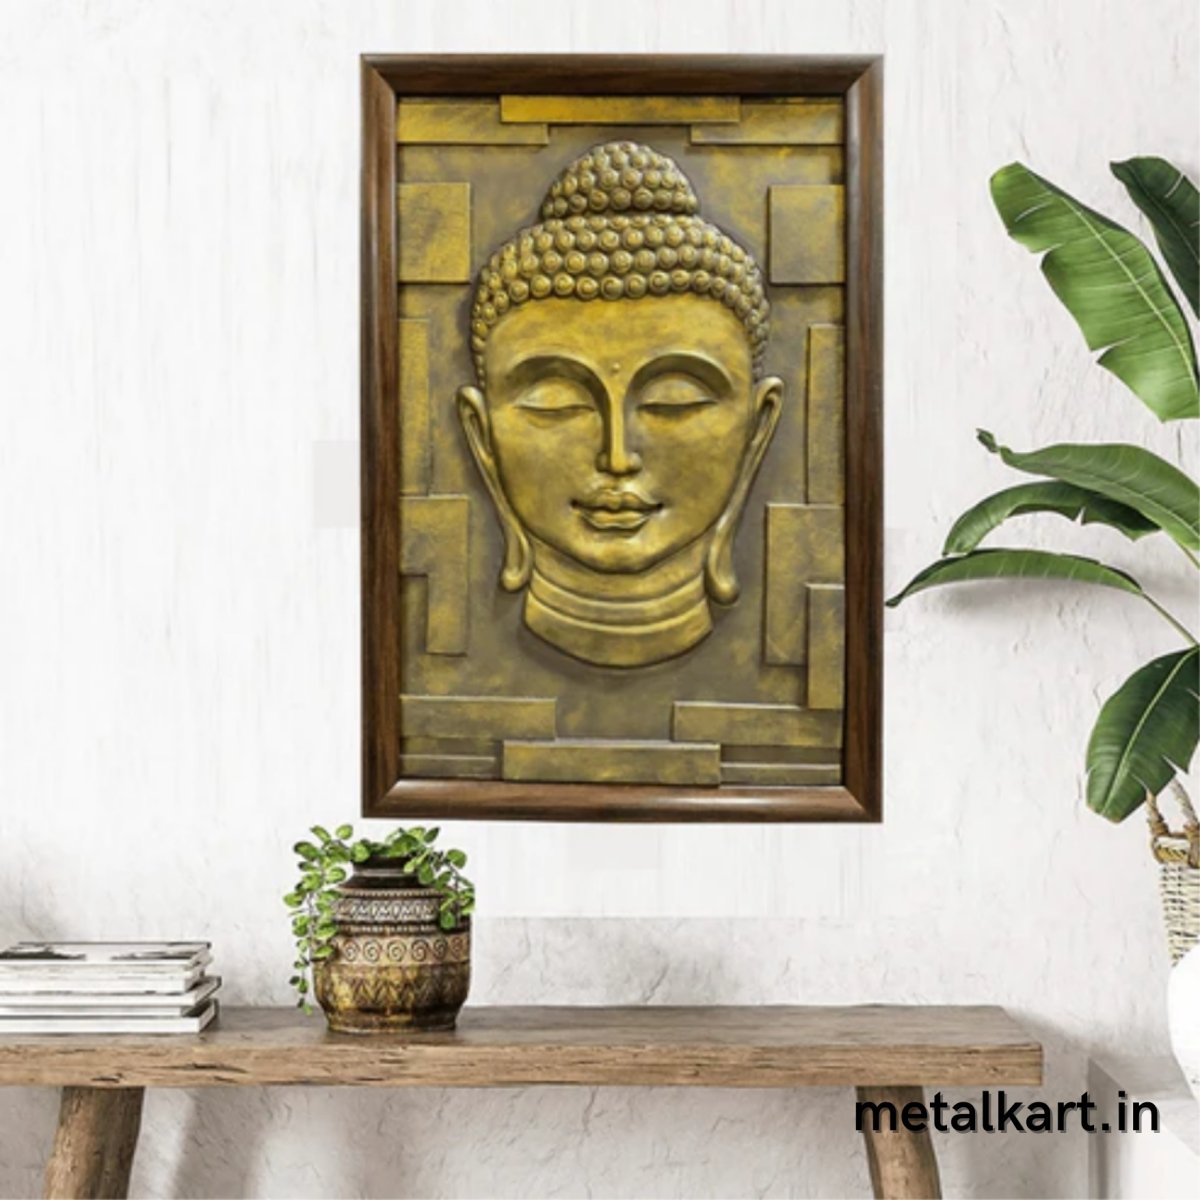 Handpainted Buddha Face 3D Wall Hanging (36 x 24 Inches)